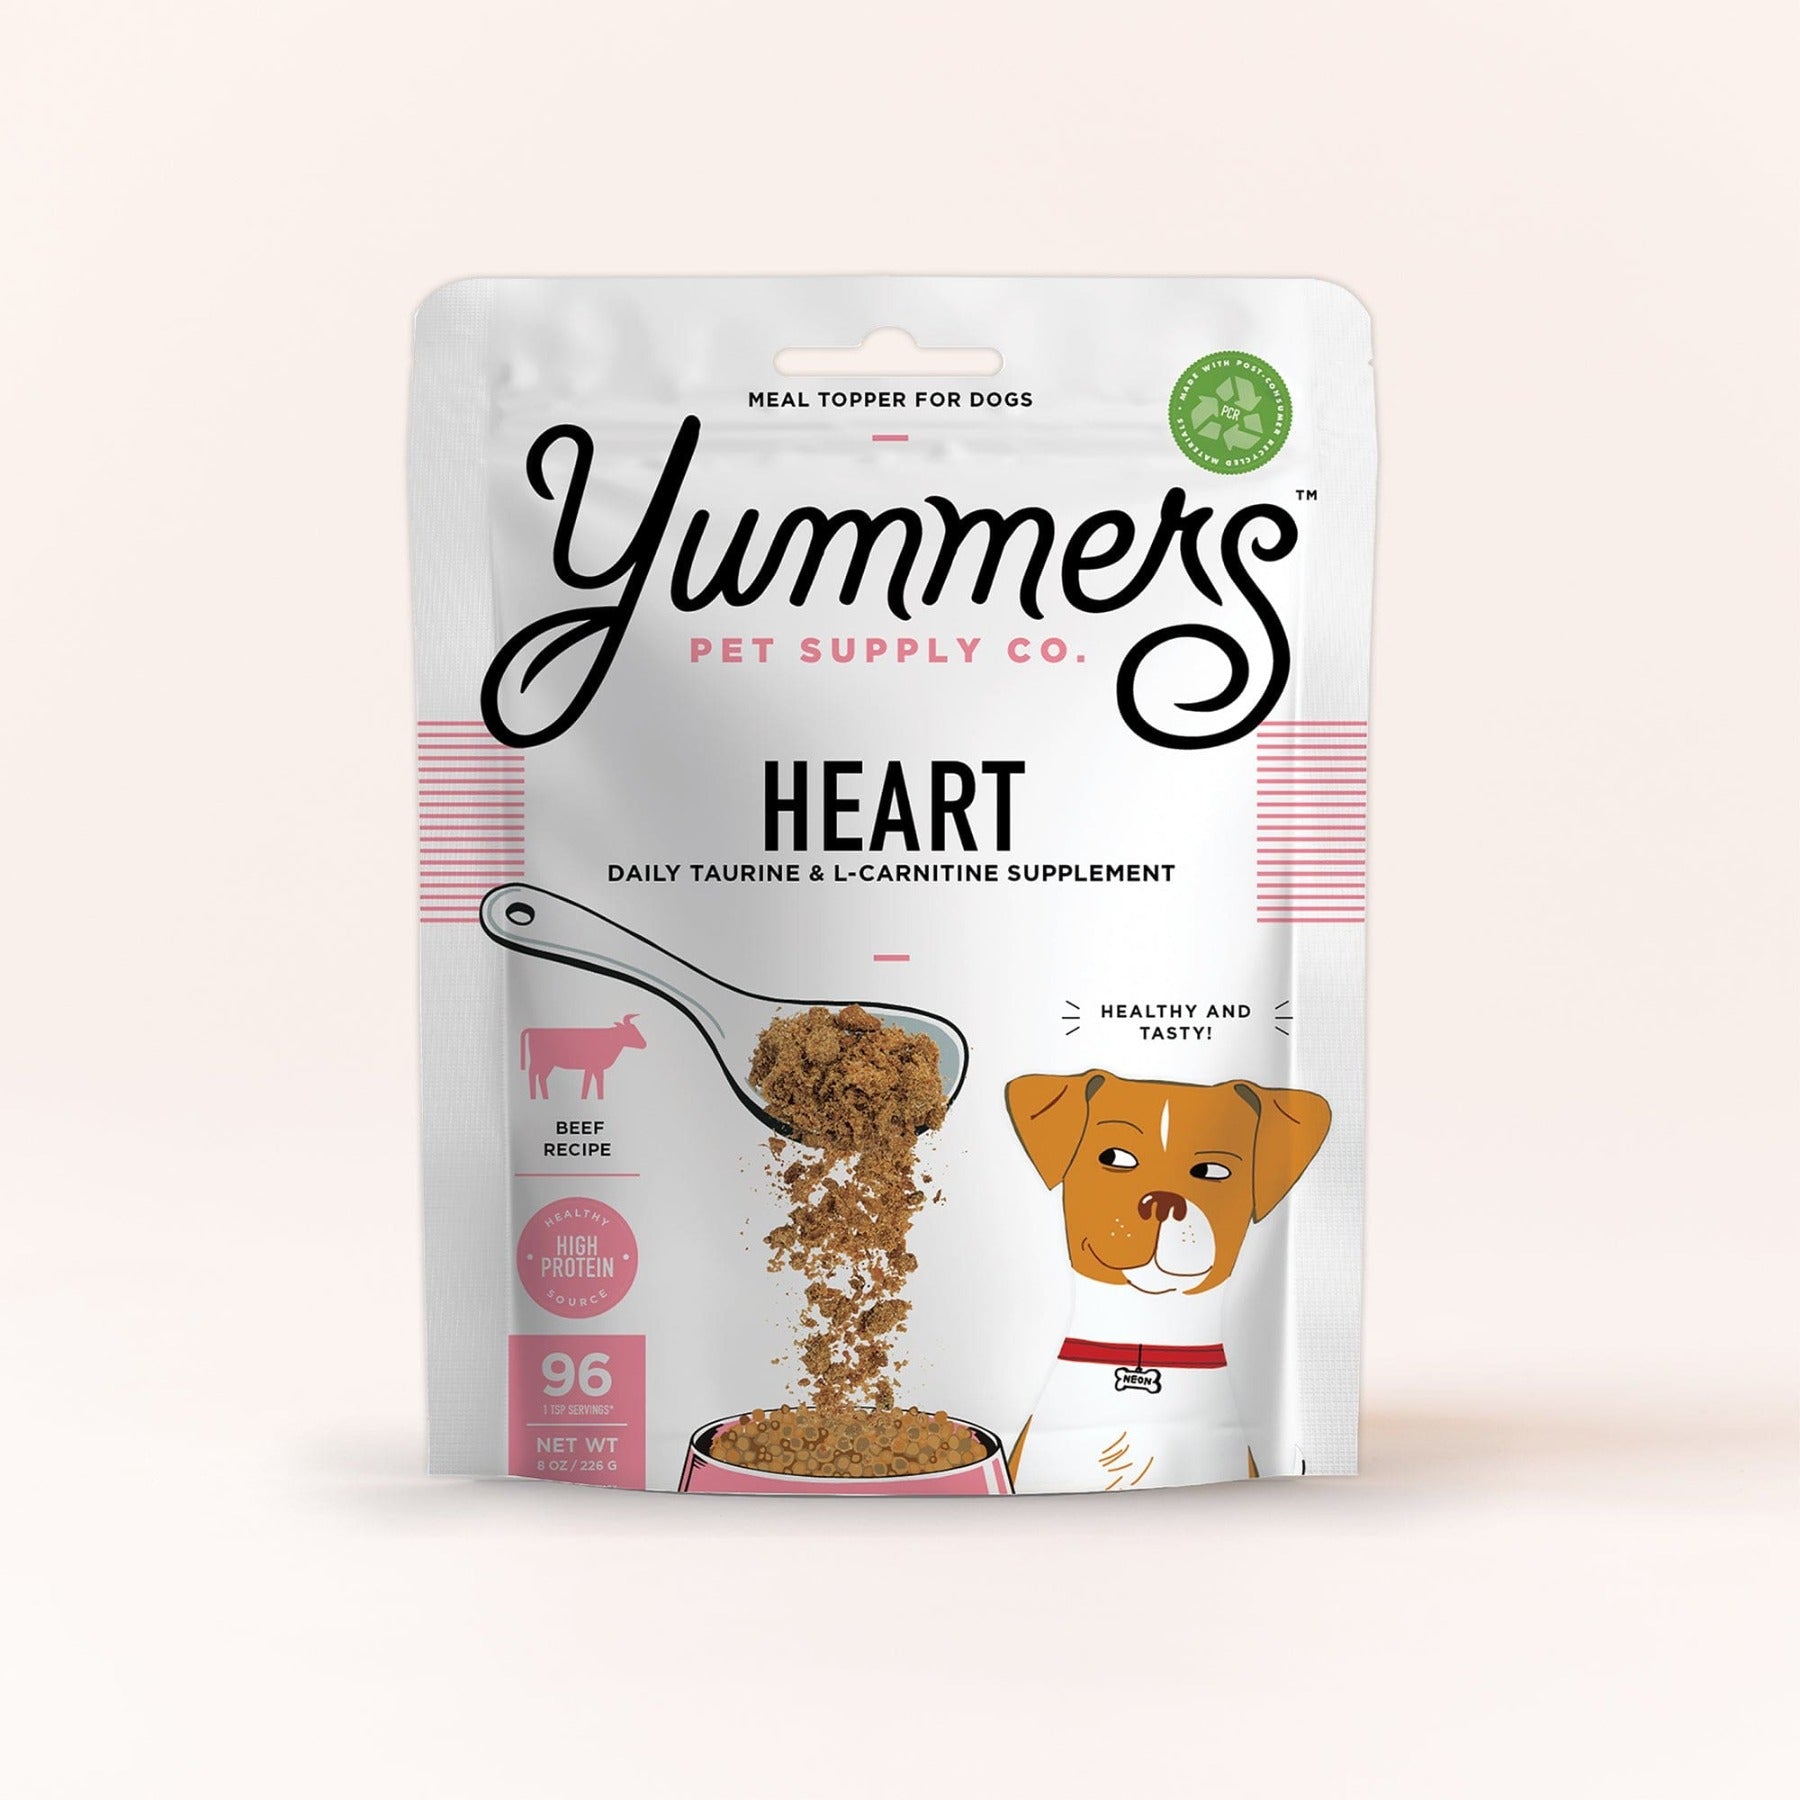 Yummers Heart Aid Supplement Meal Mix-In